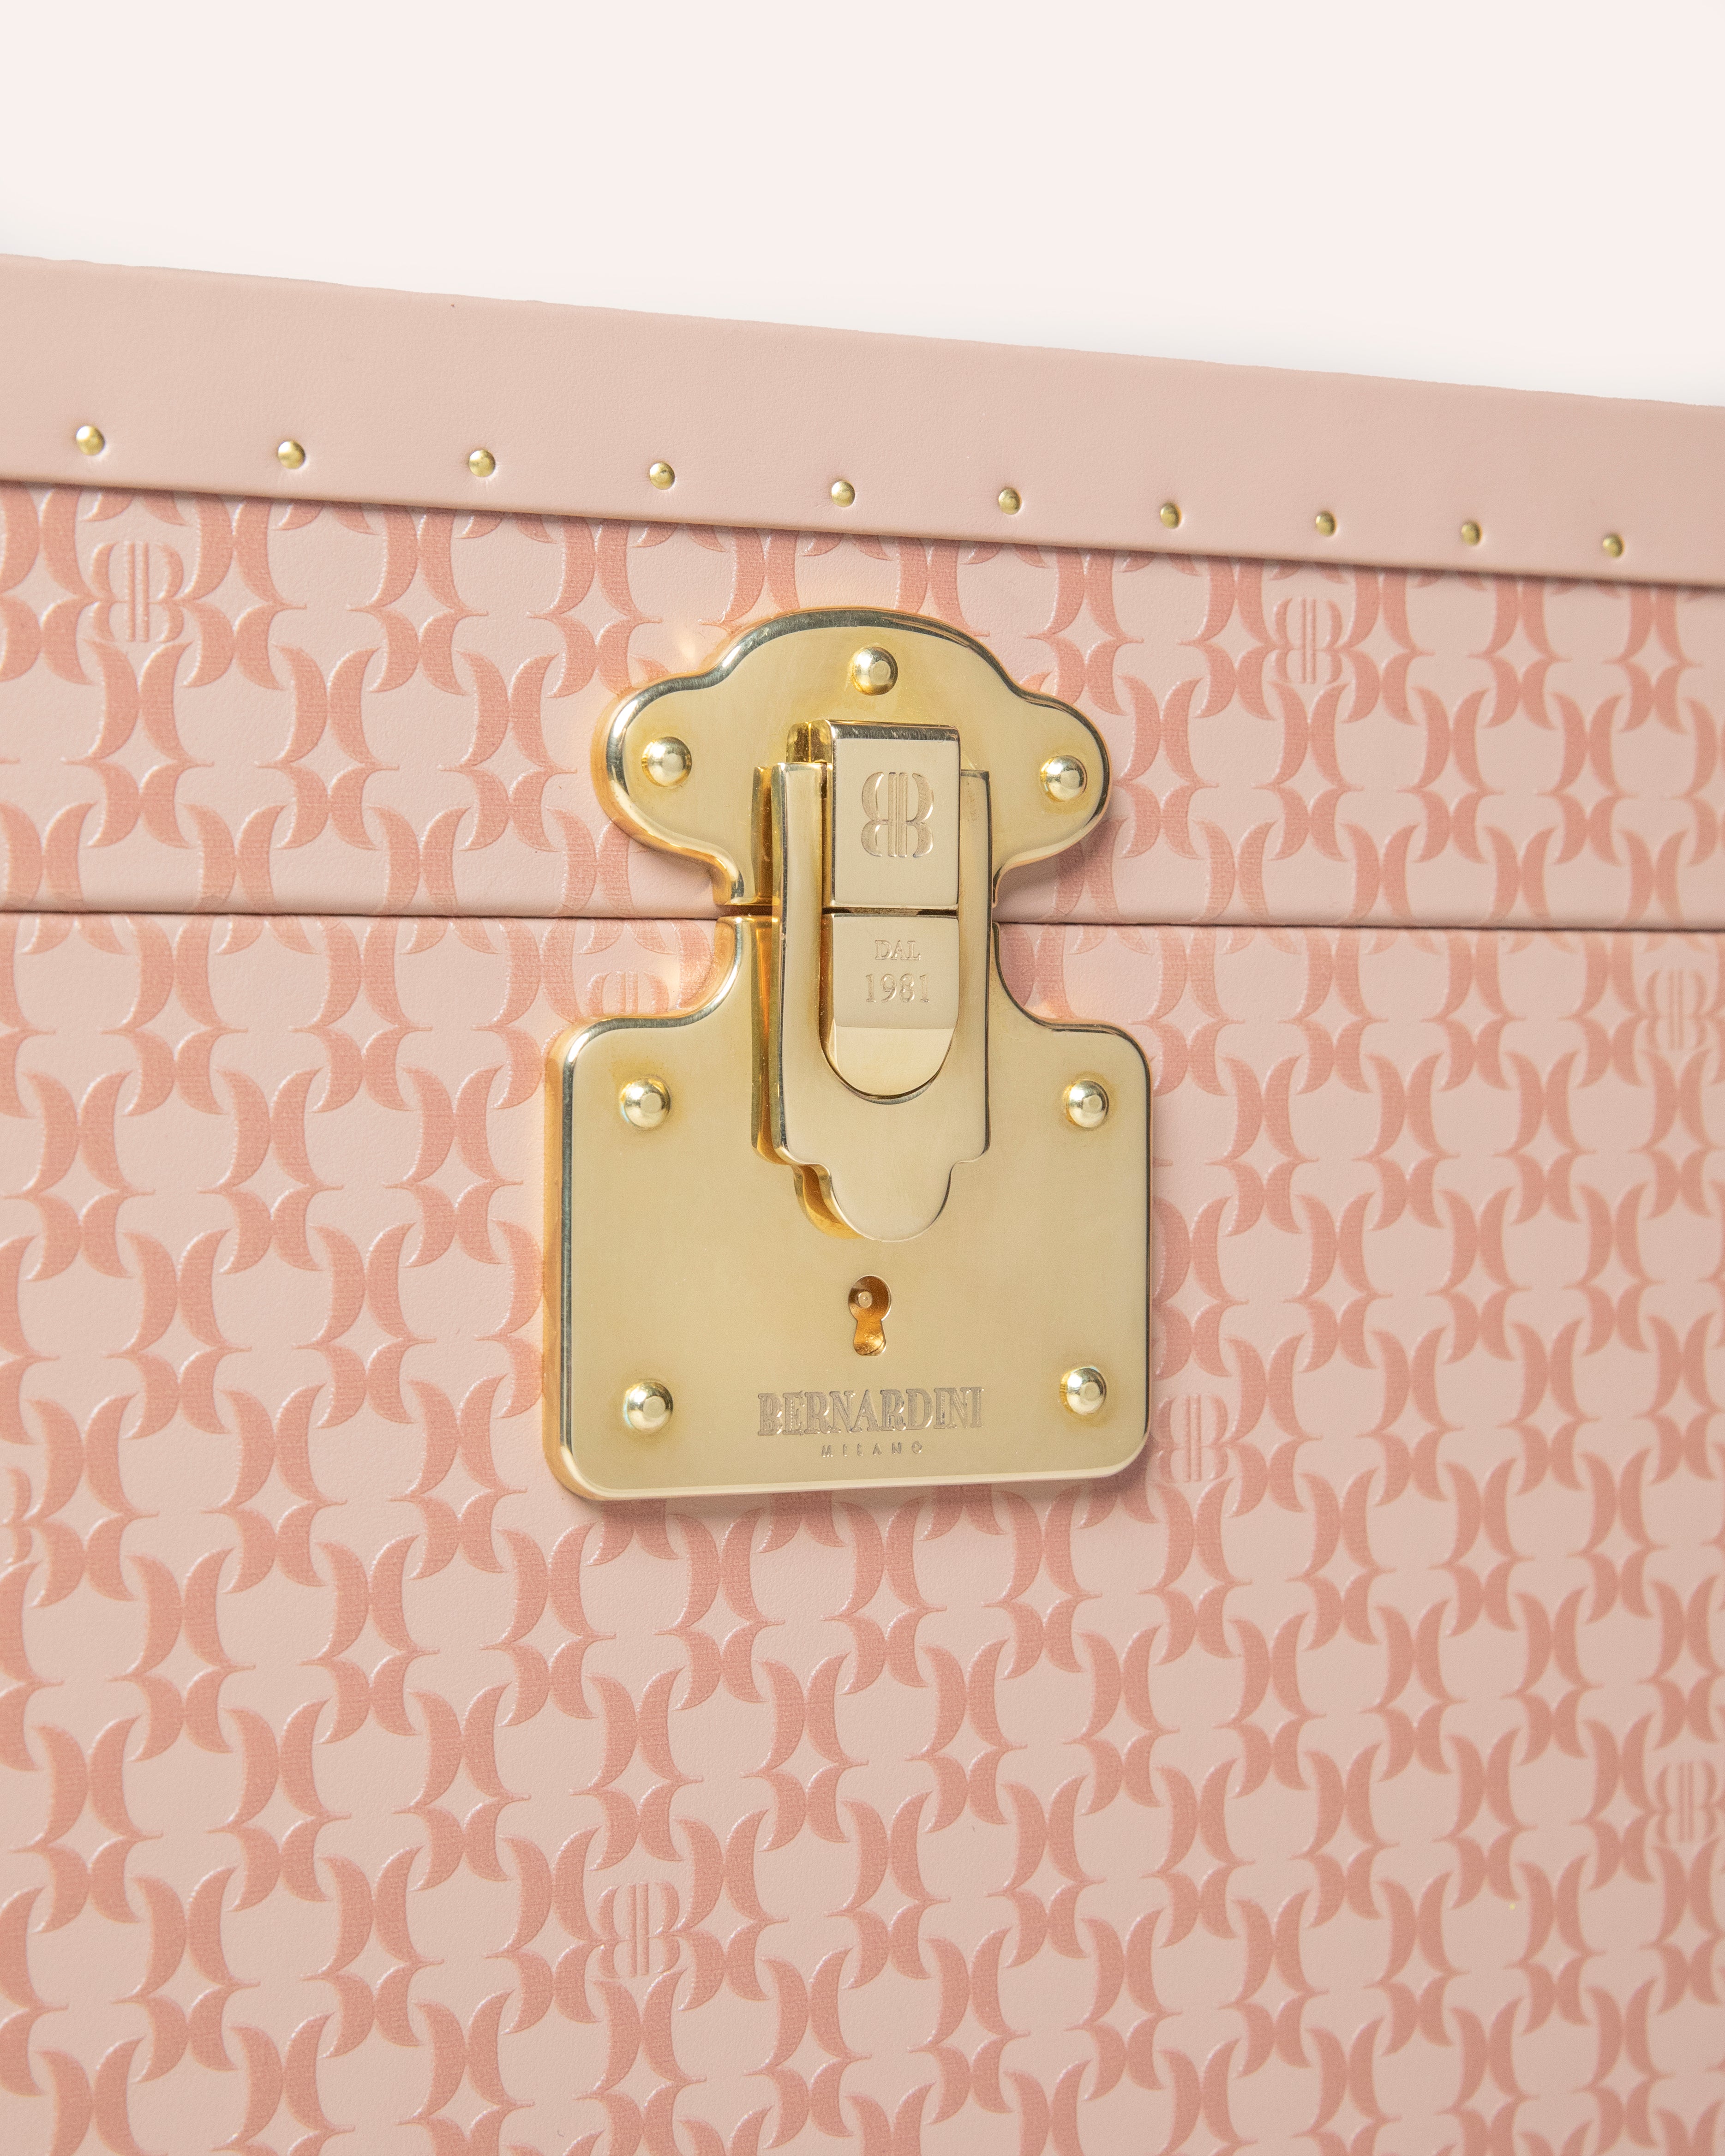 Bernardini Milano Champagne trunk - pink leather and alcantara - with 6 flutes and ice bucket - detail